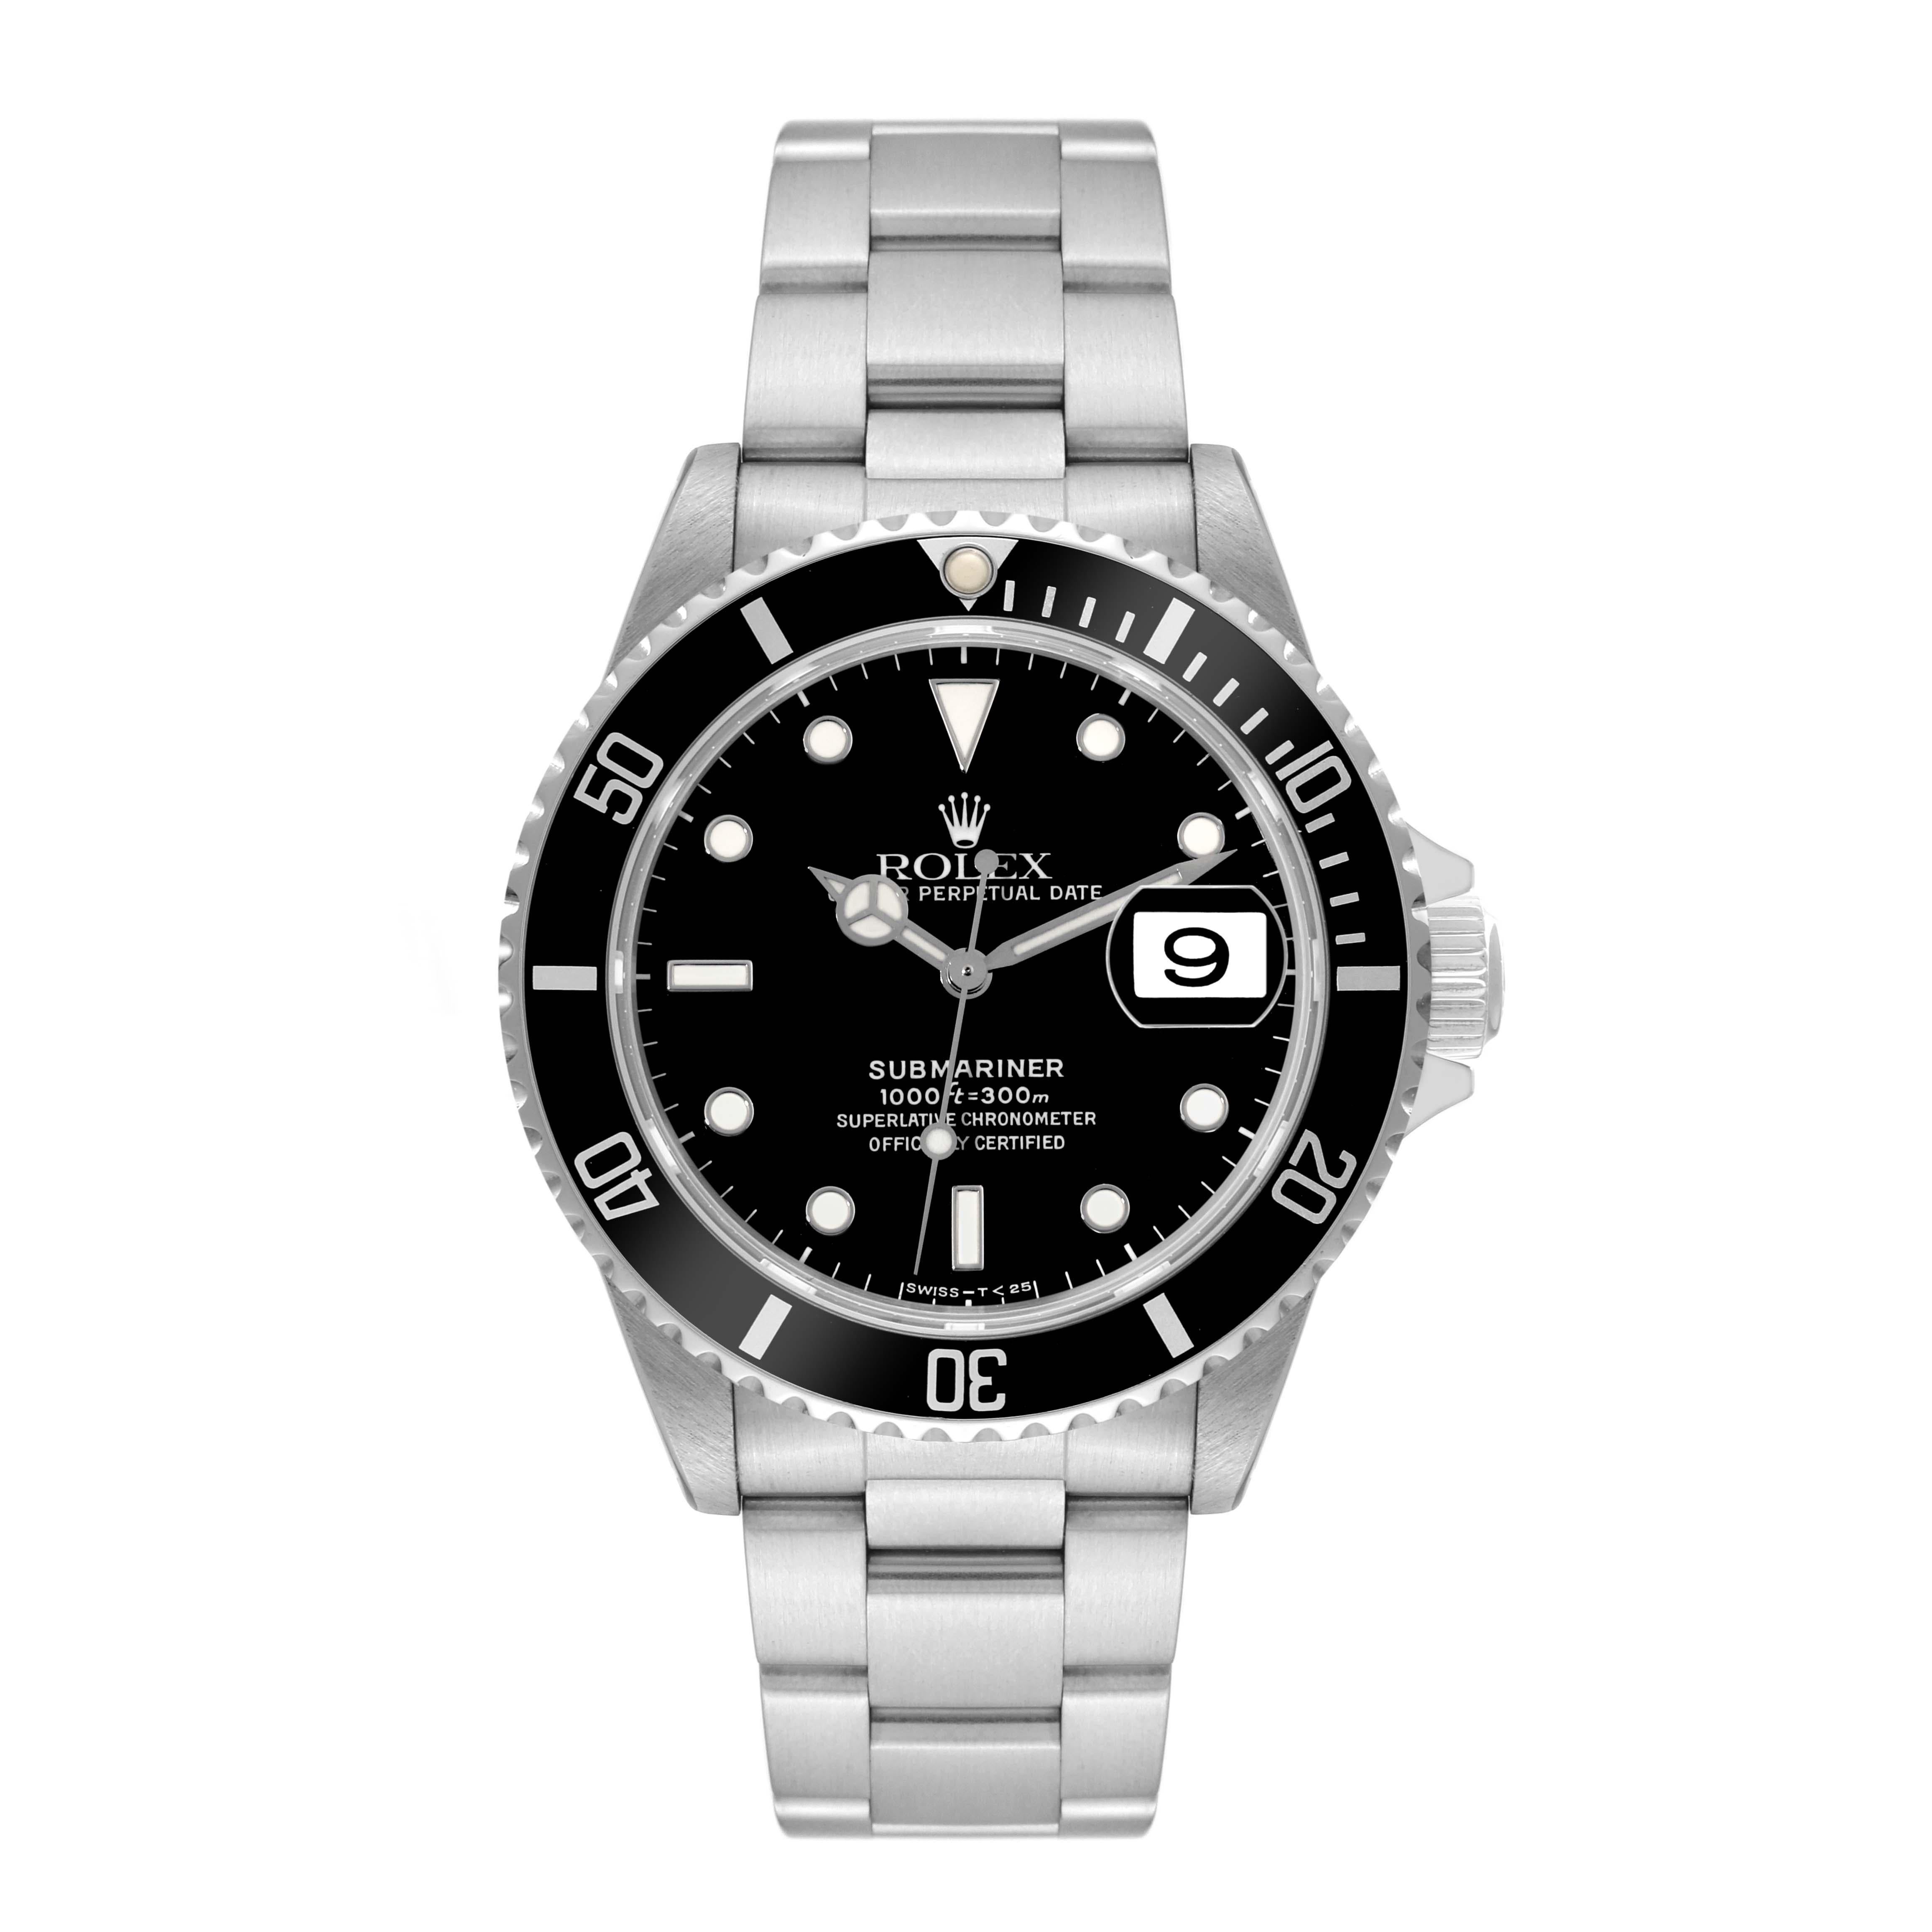 Rolex Submariner Date Black Dial Steel Mens Watch 16610 Box Papers 1